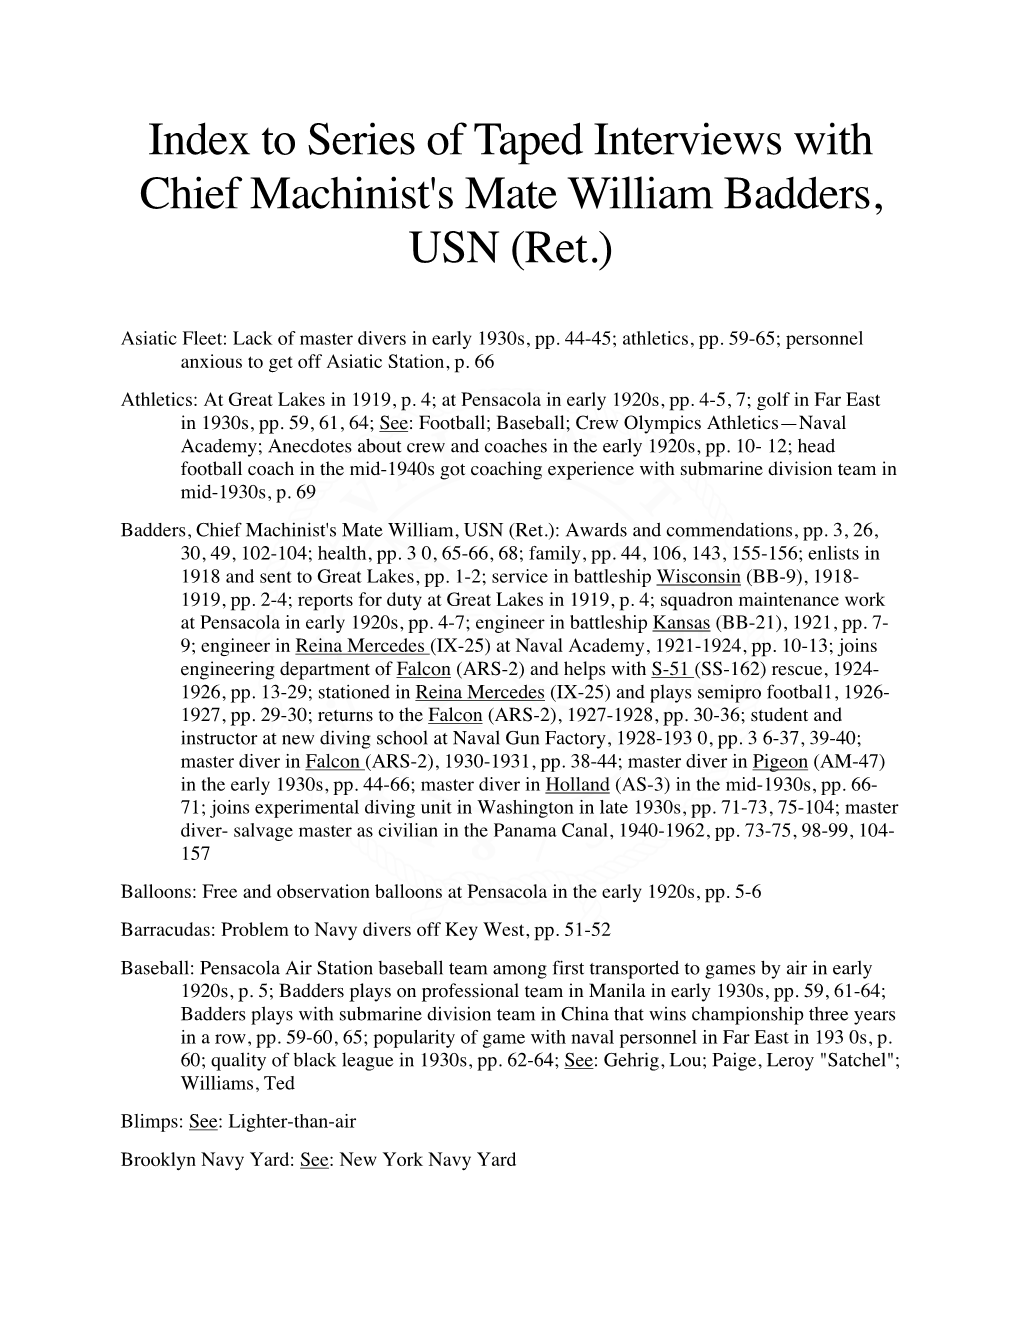 Index to Series of Taped Interviews with Chief Machinist's Mate William Badders, USN (Ret.)